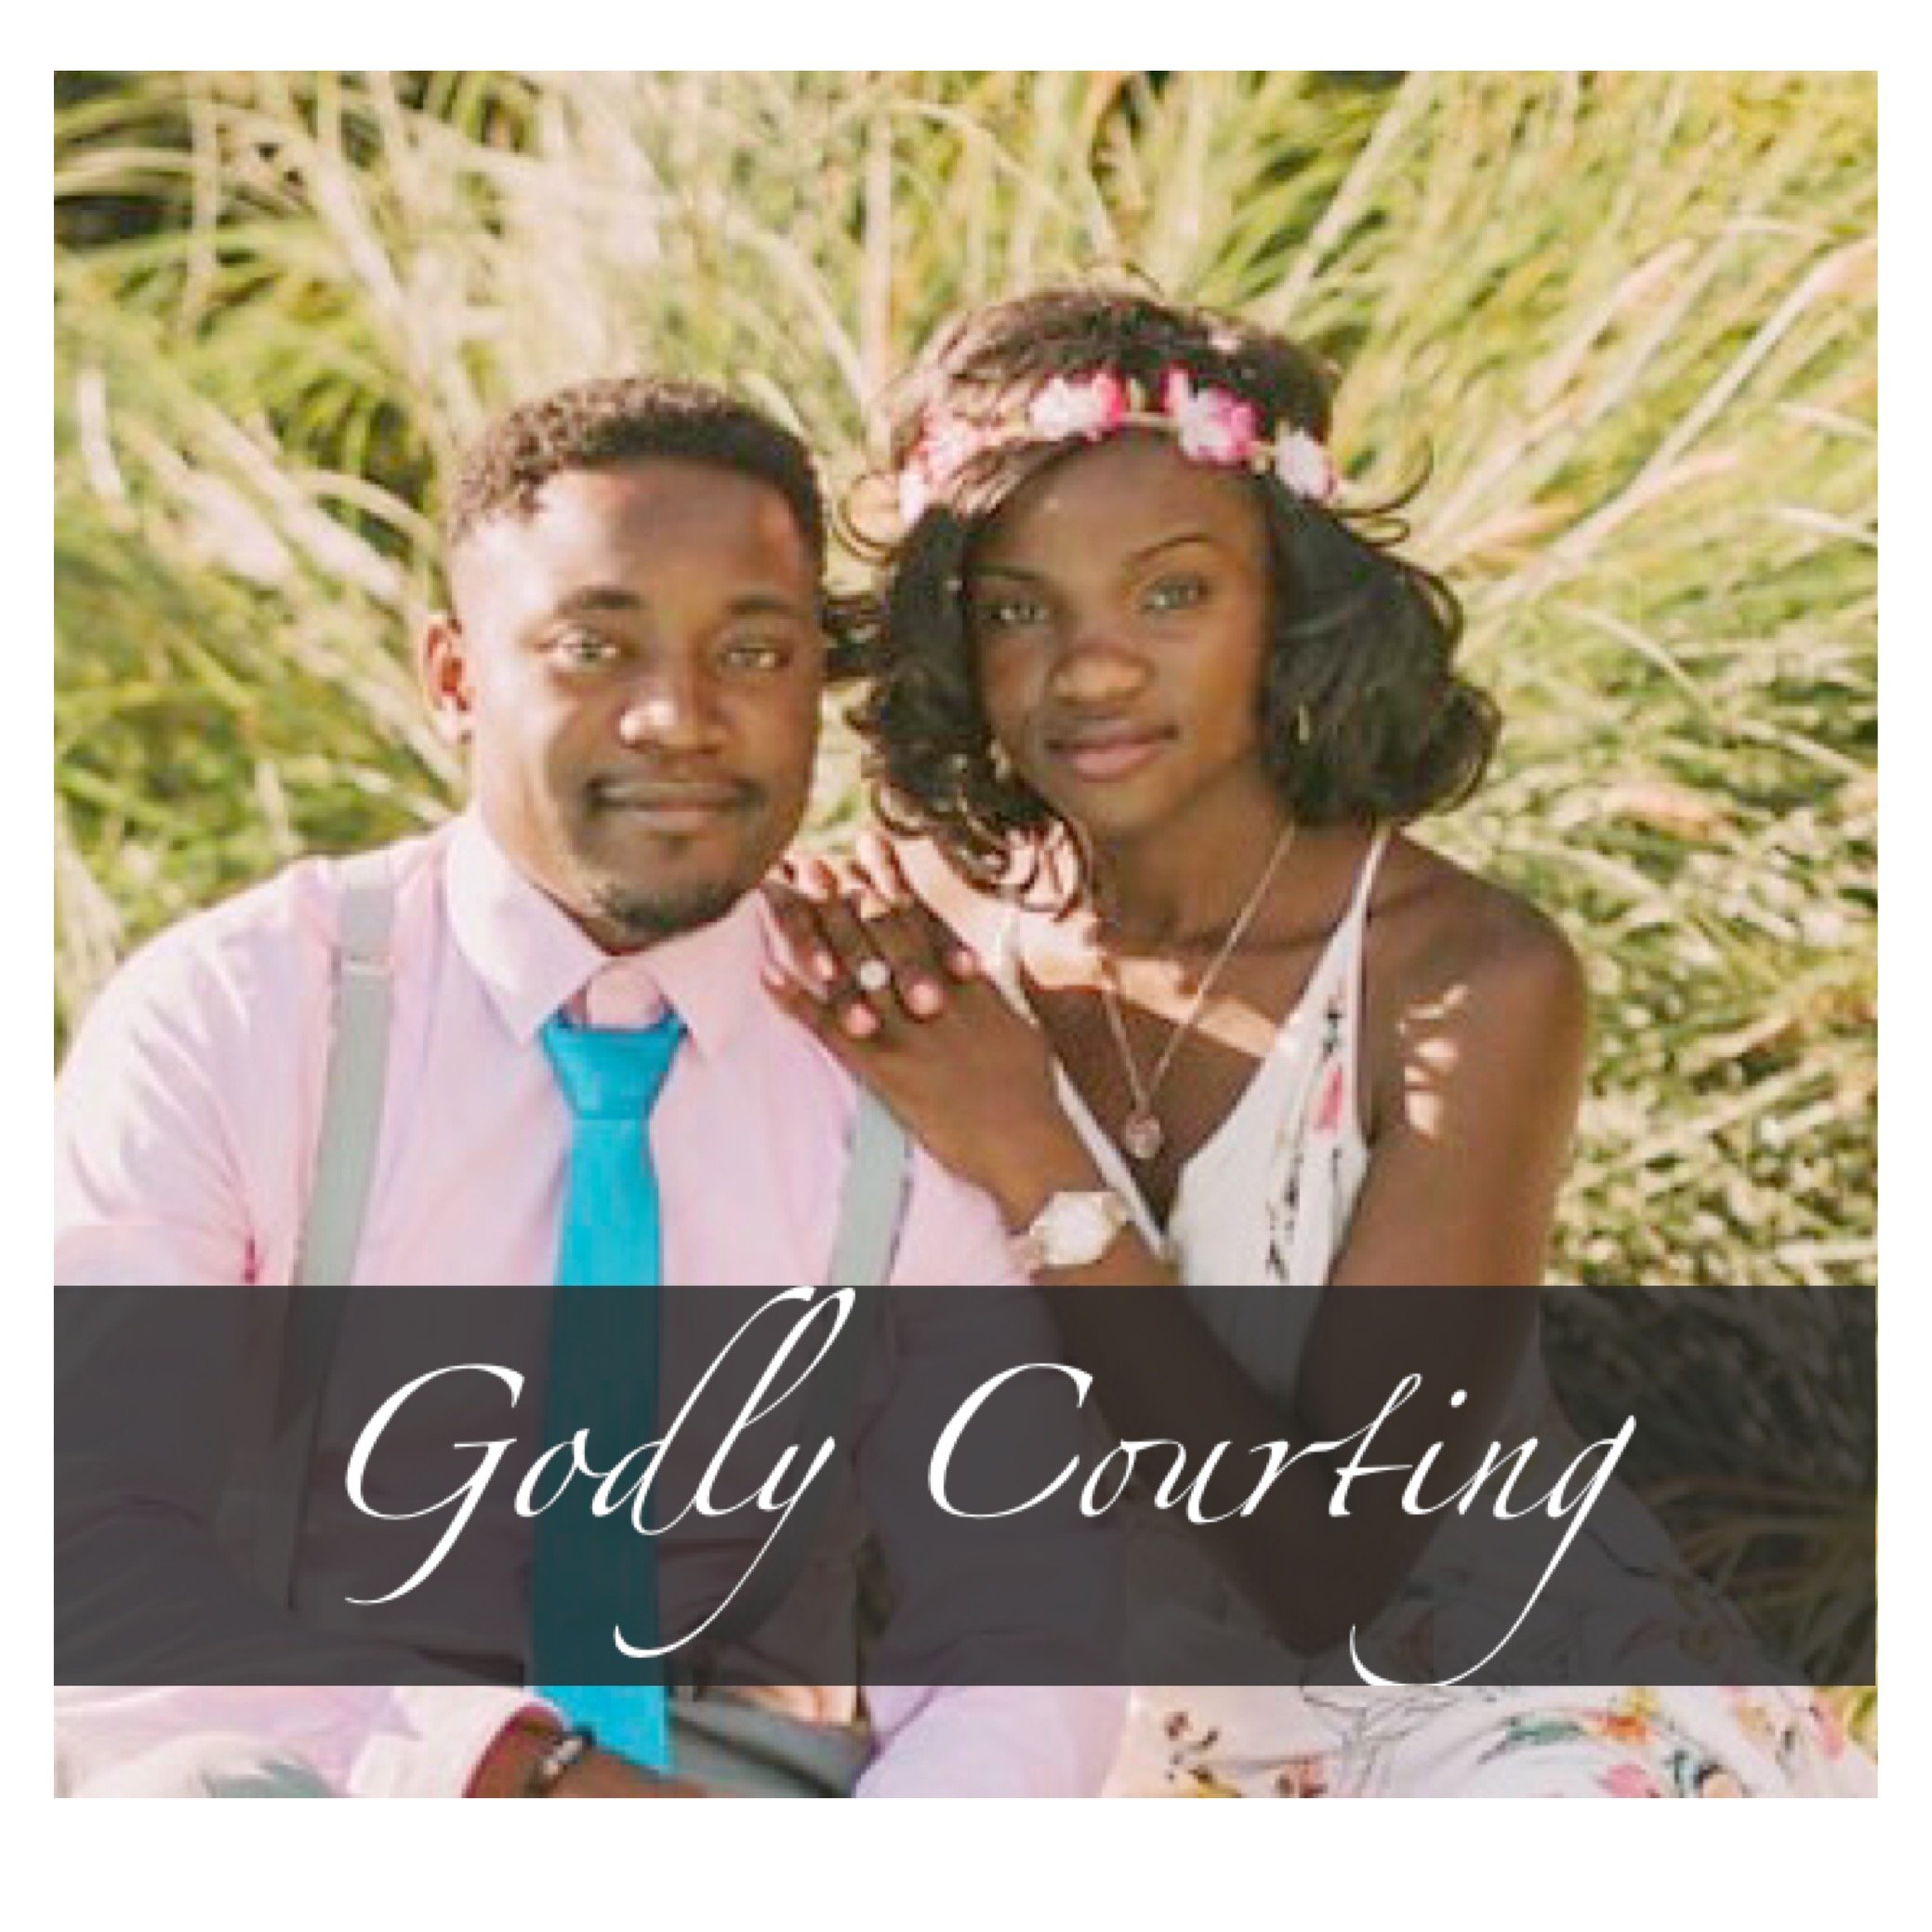 Priscilla&Warrick || Married, Courting or Single and Ready for a Godly marriage? || Follow Along as we Pursue Marriage God's Way